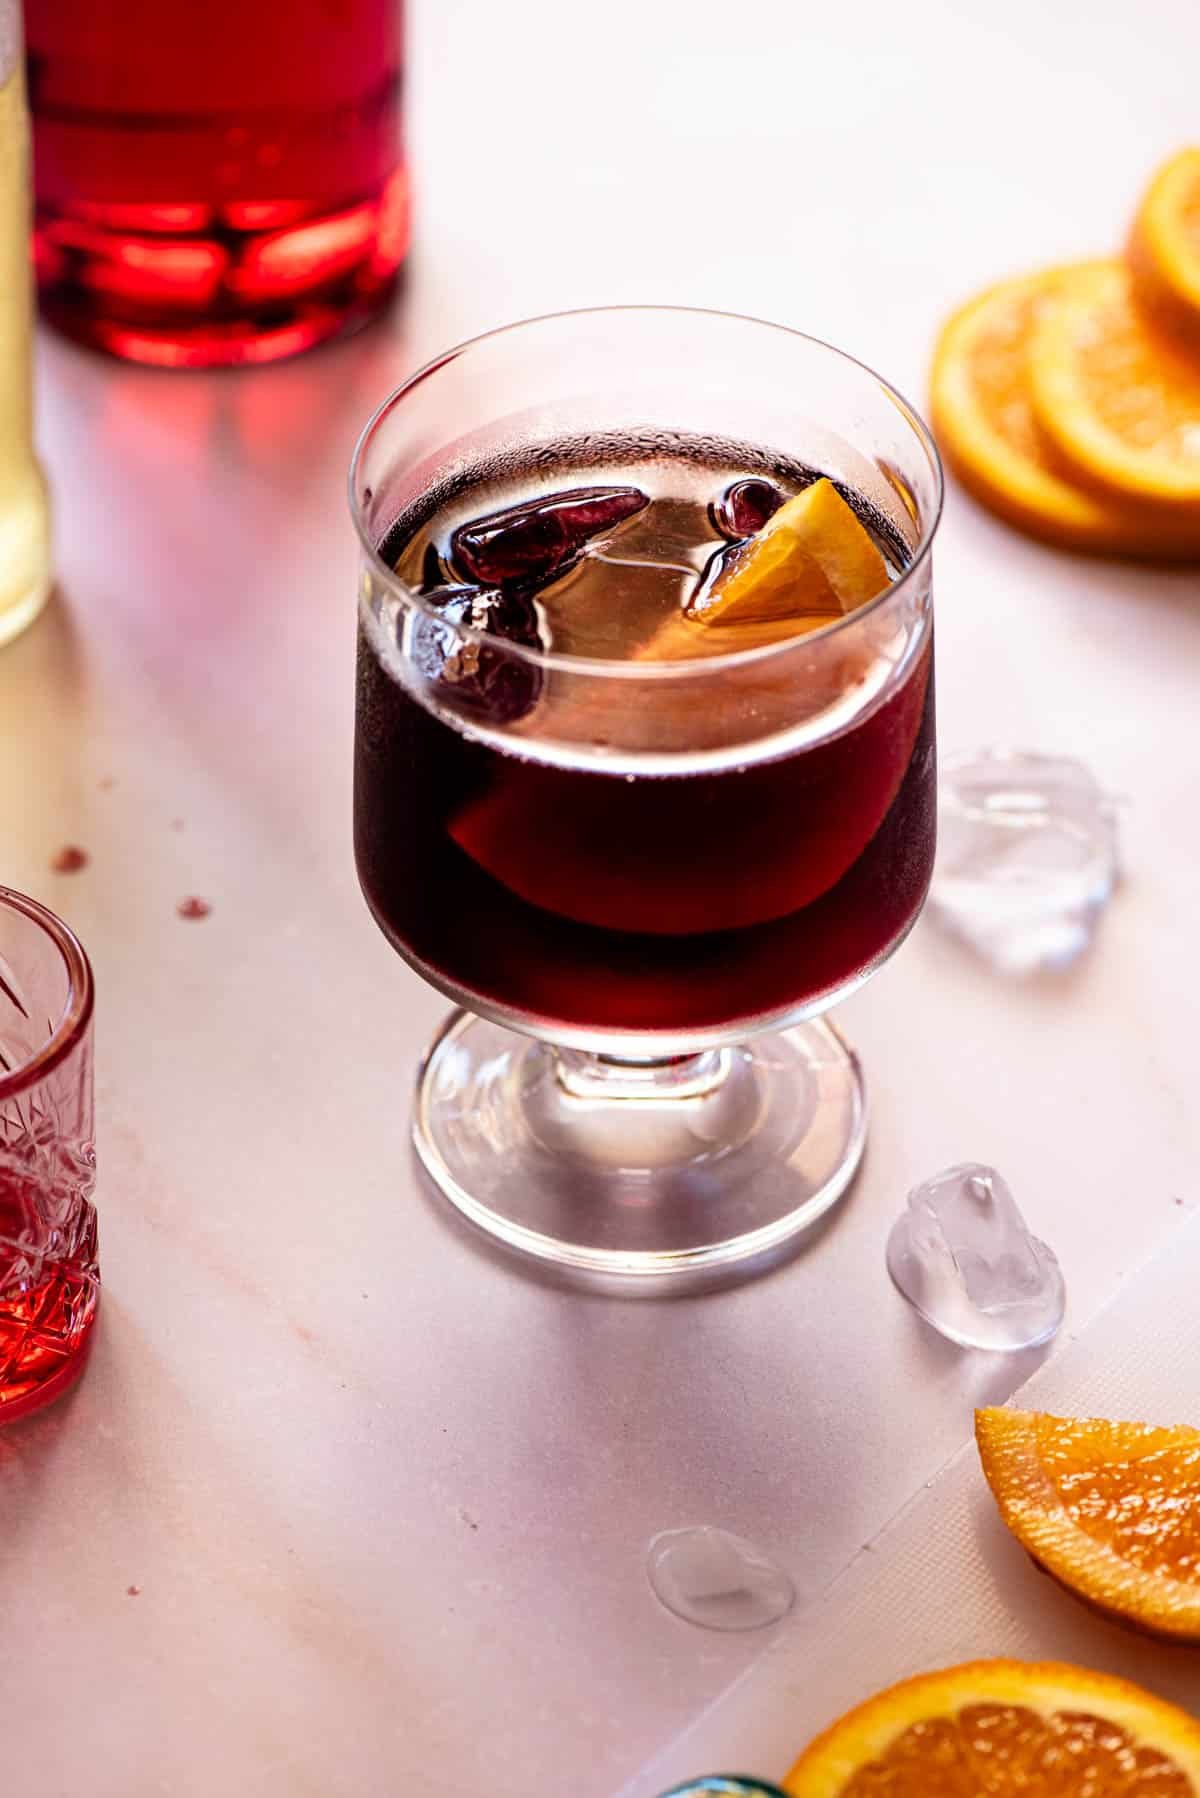 A red wine spritz (prampolini) on a light background with slices of orange, ice and campari at the side.